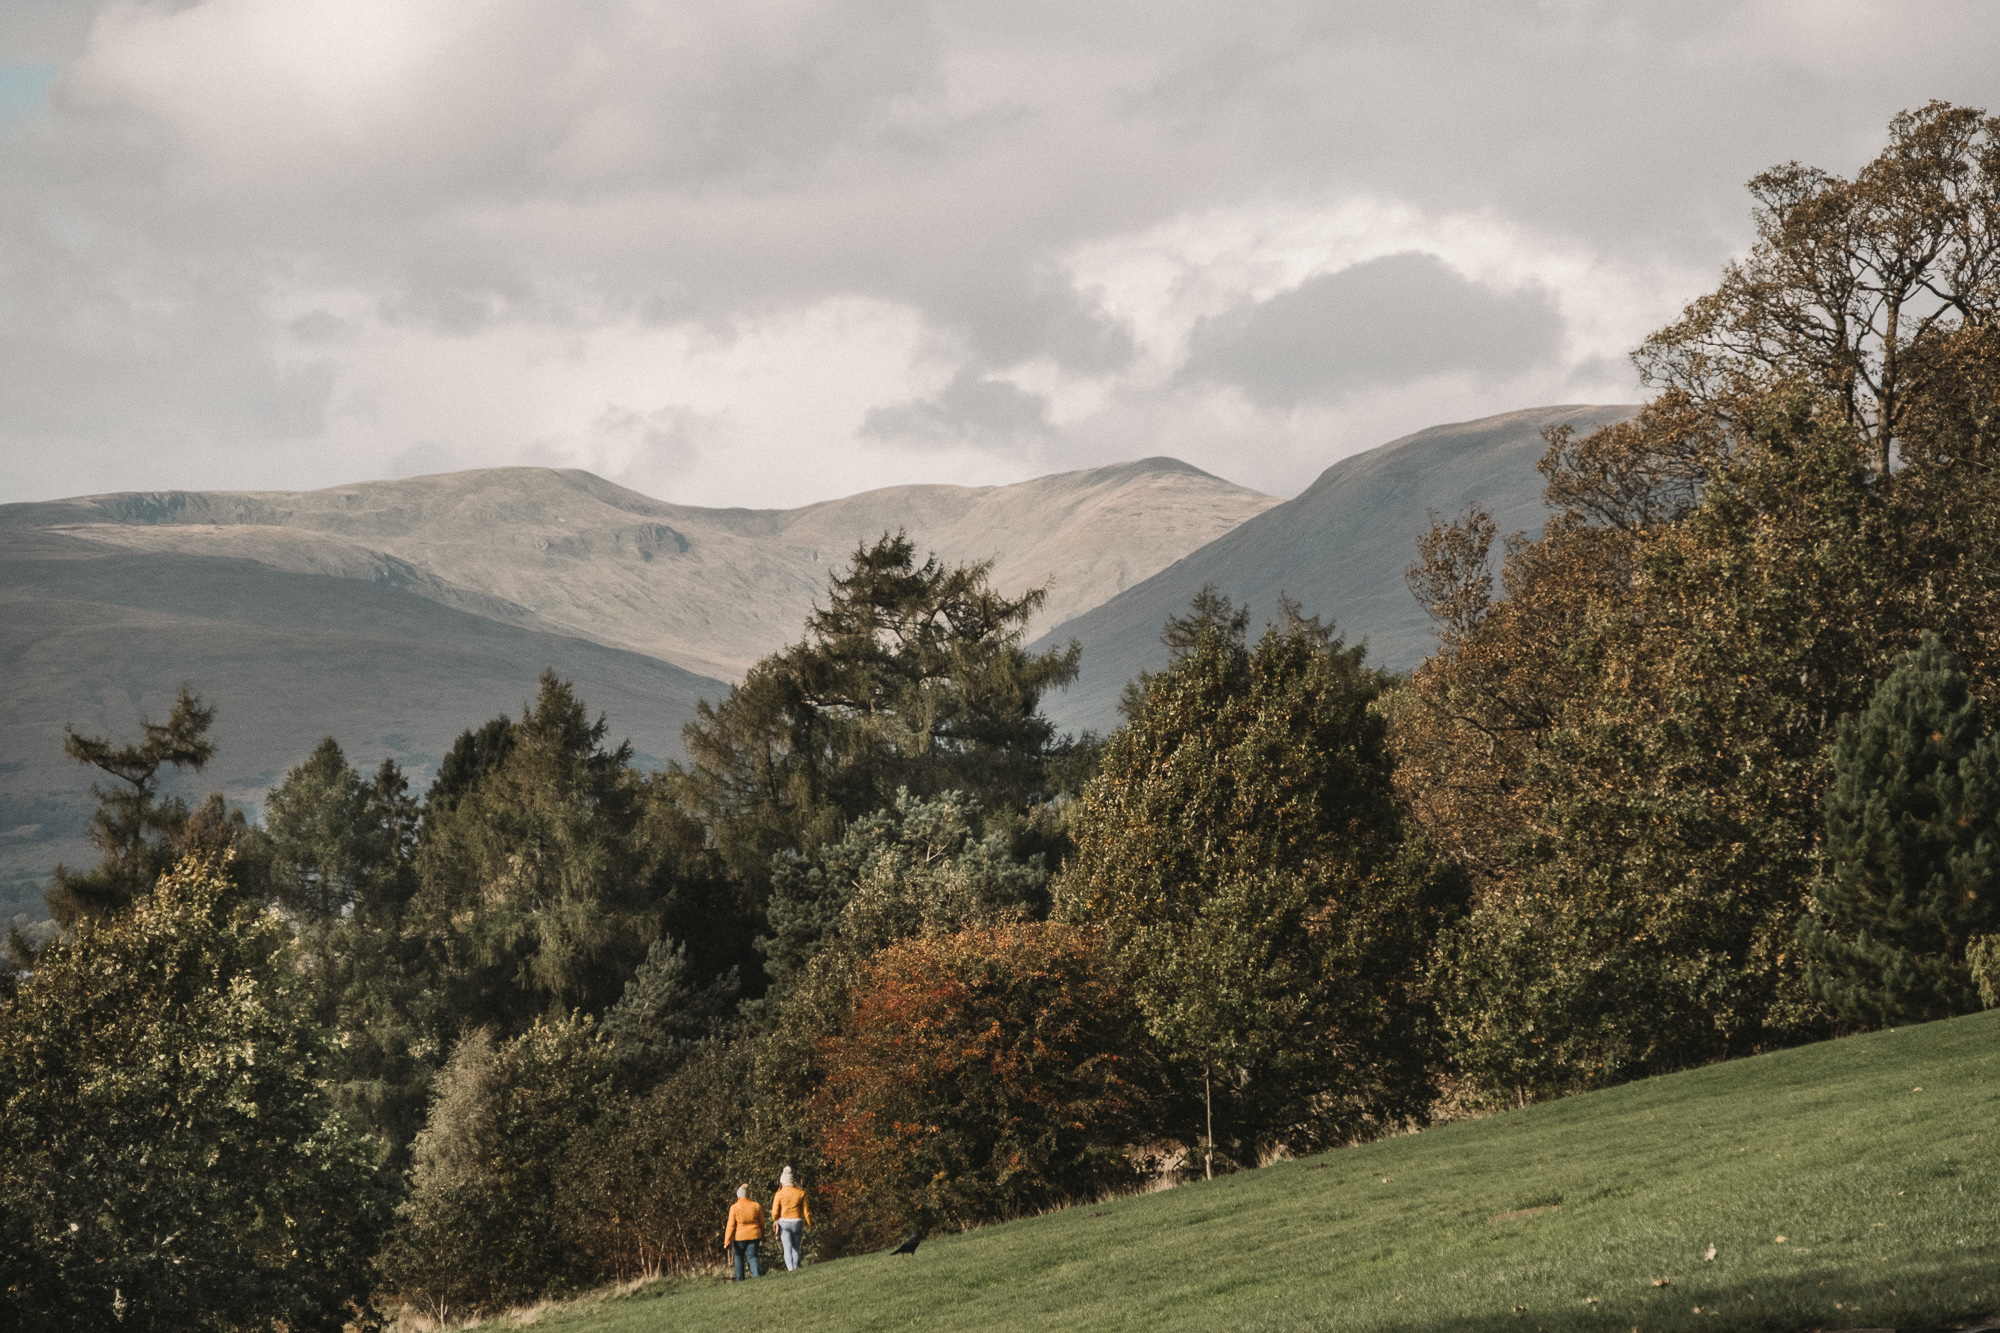 Take a stroll down from the castle to the shore of Loch Lomond